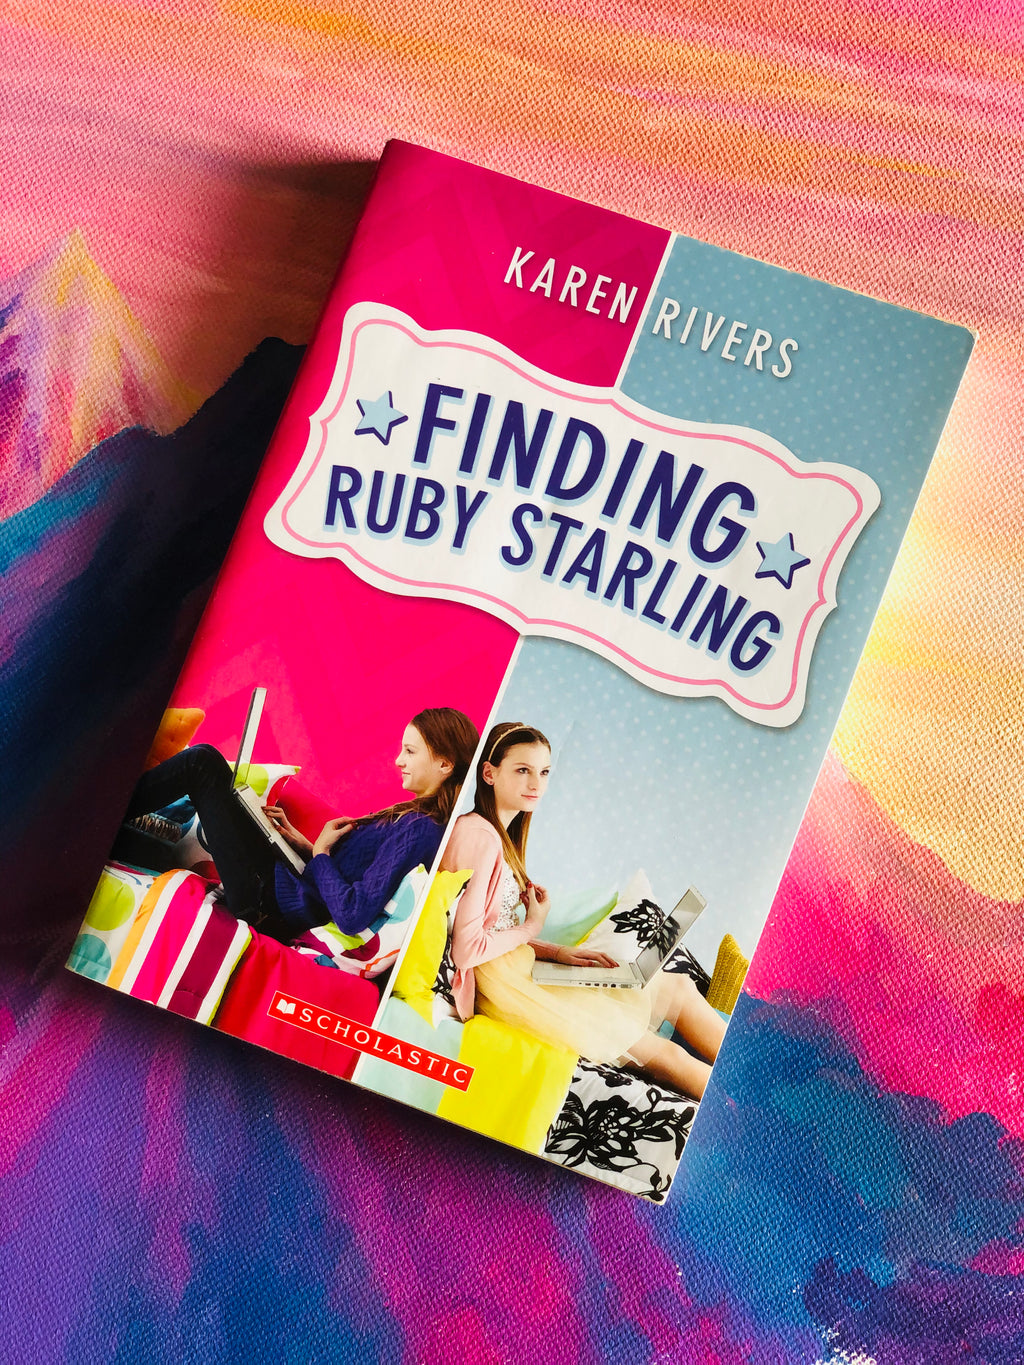 Finding Ruby Starling- By Karen Rivers